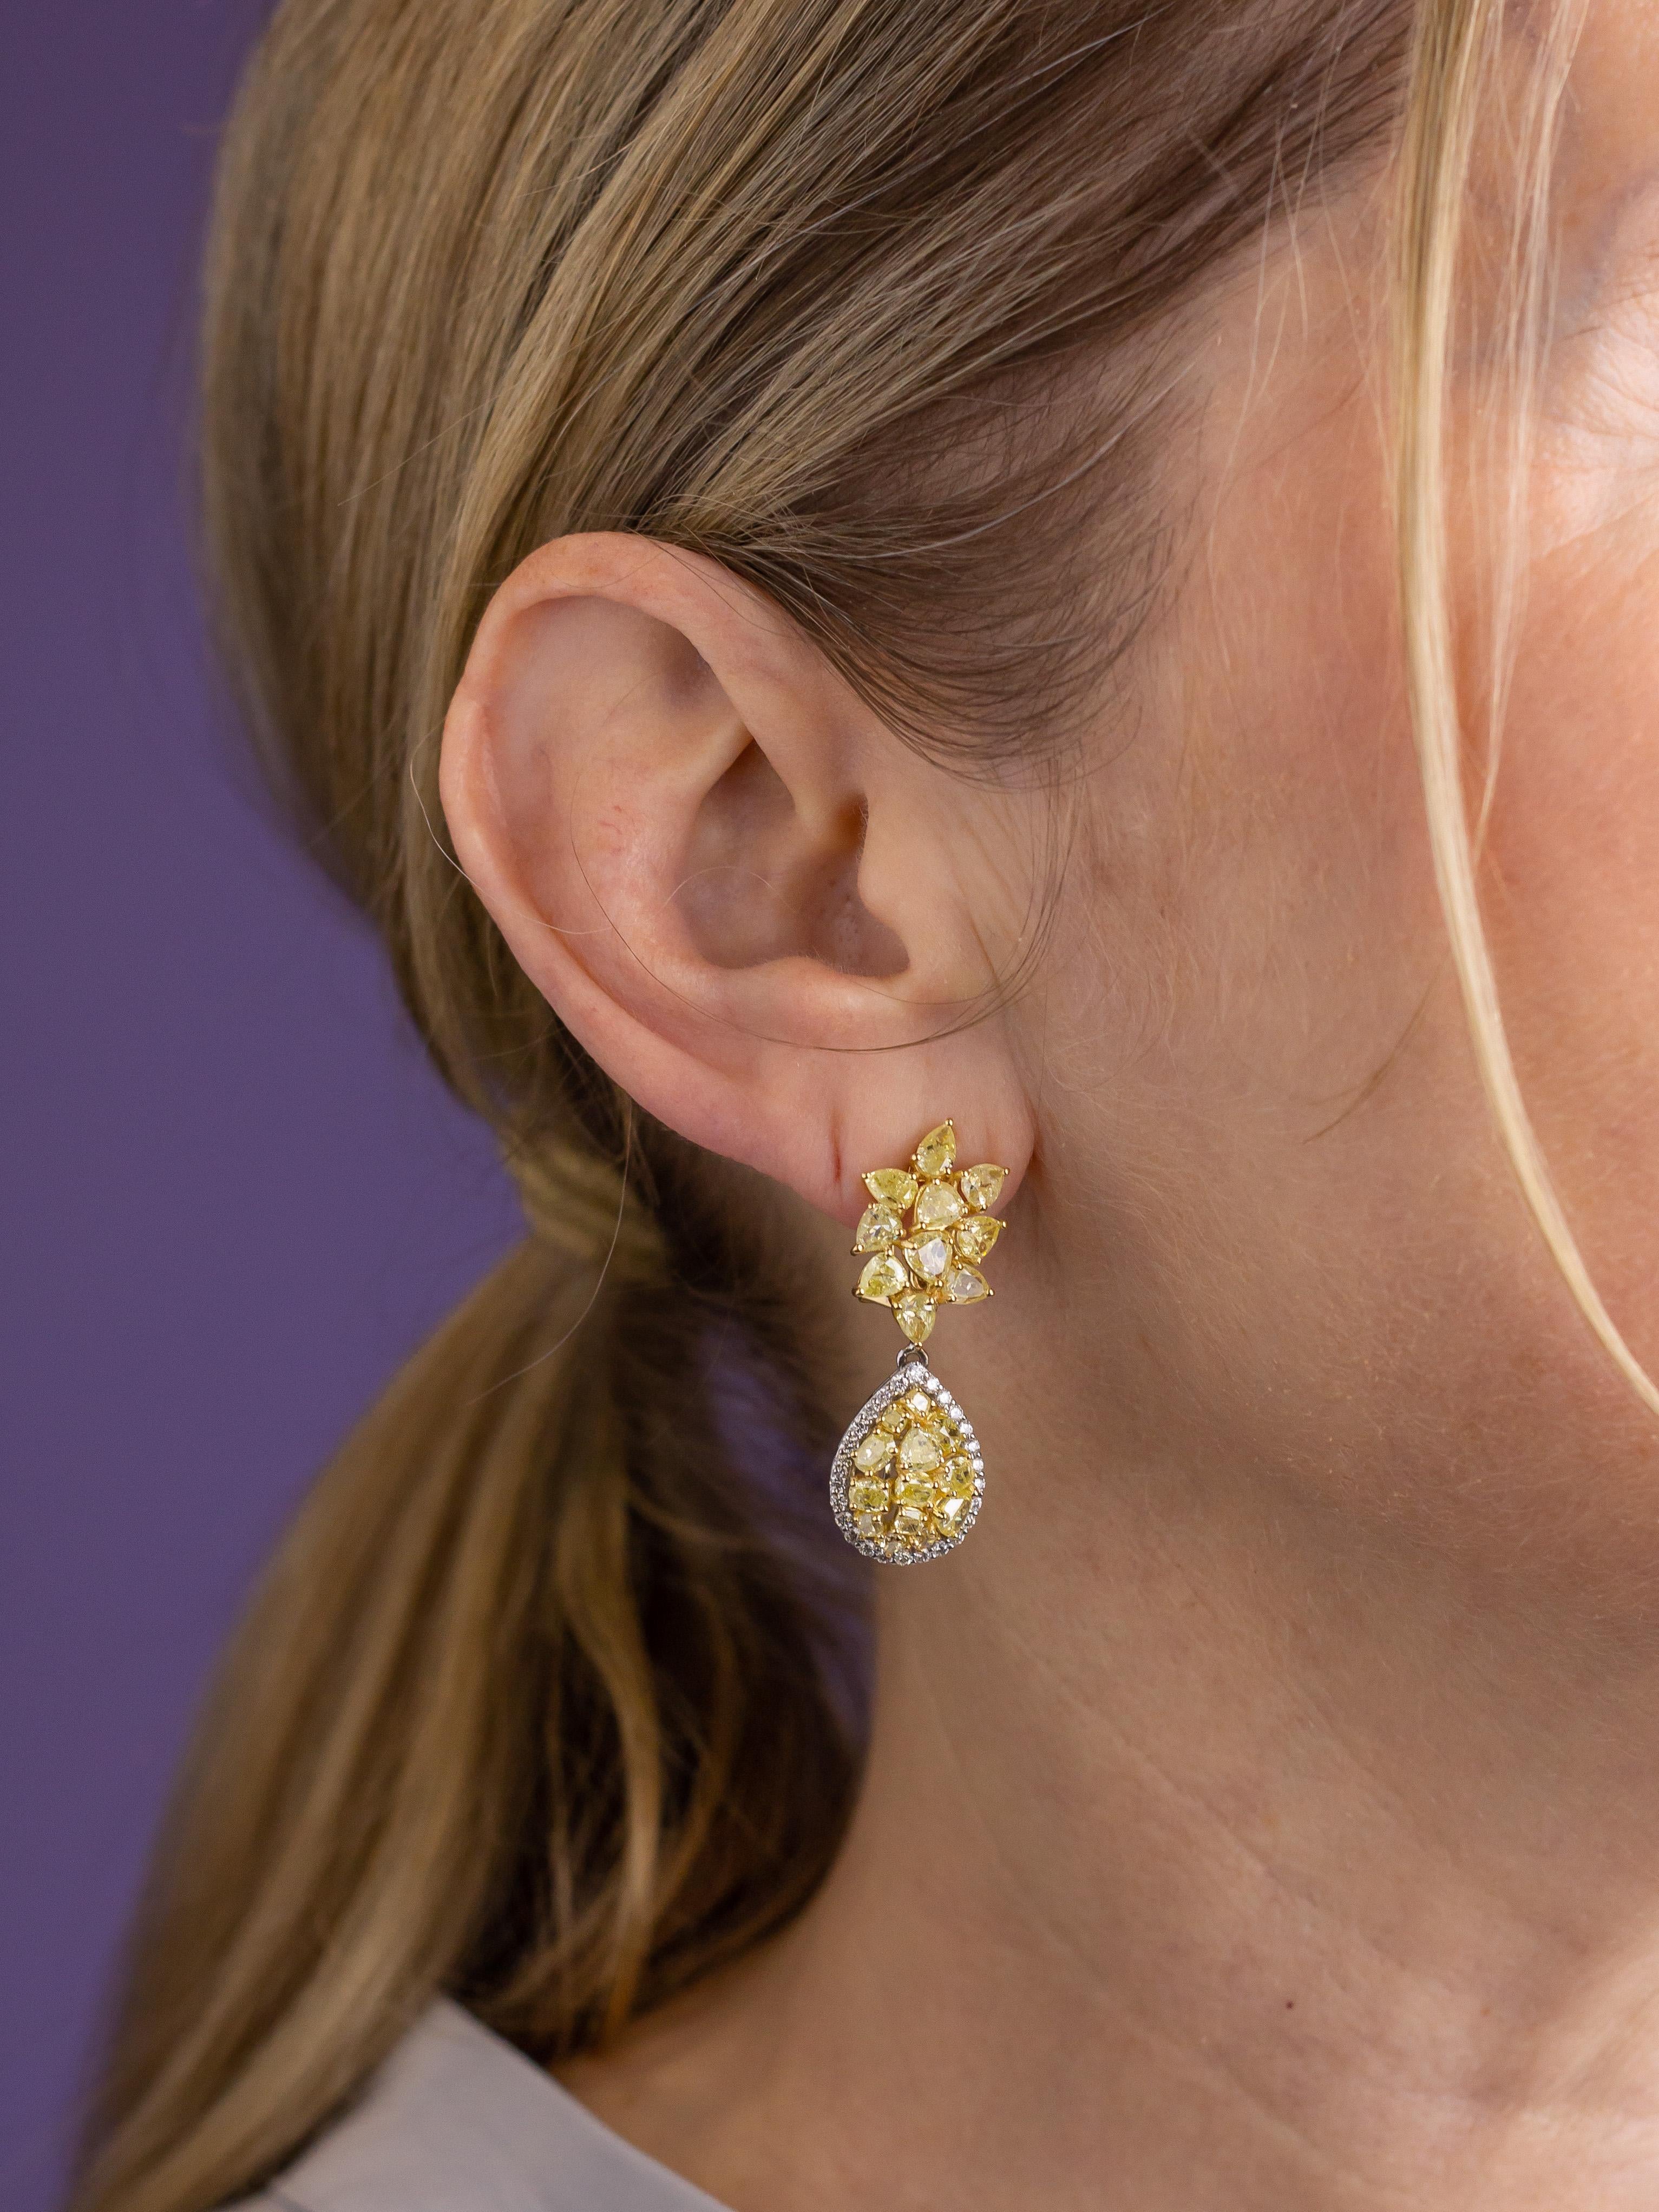 This pair of impressive drop earrings are crafted from 18 karat yellow gold and have been set with an array of yellow and white diamonds. The drop earrings stem from a cluster of three claw set pear shaped diamonds from which a teardrop pendant